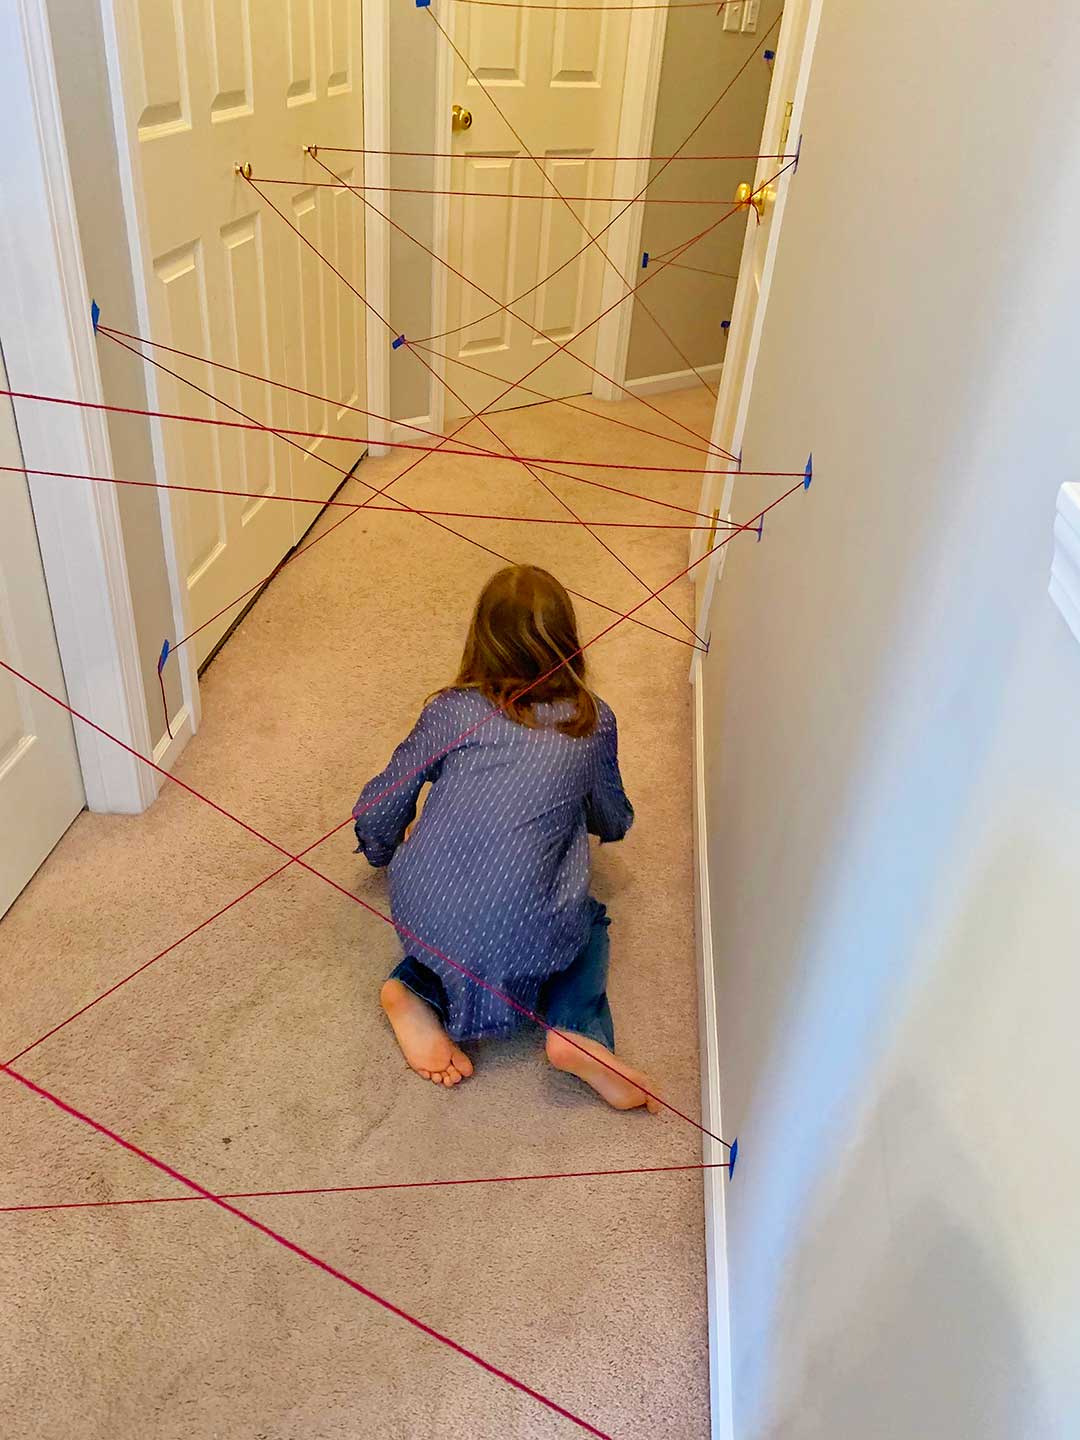 A girl in a polka dotted blue shirt and jeans going through the maze on hands and knees.